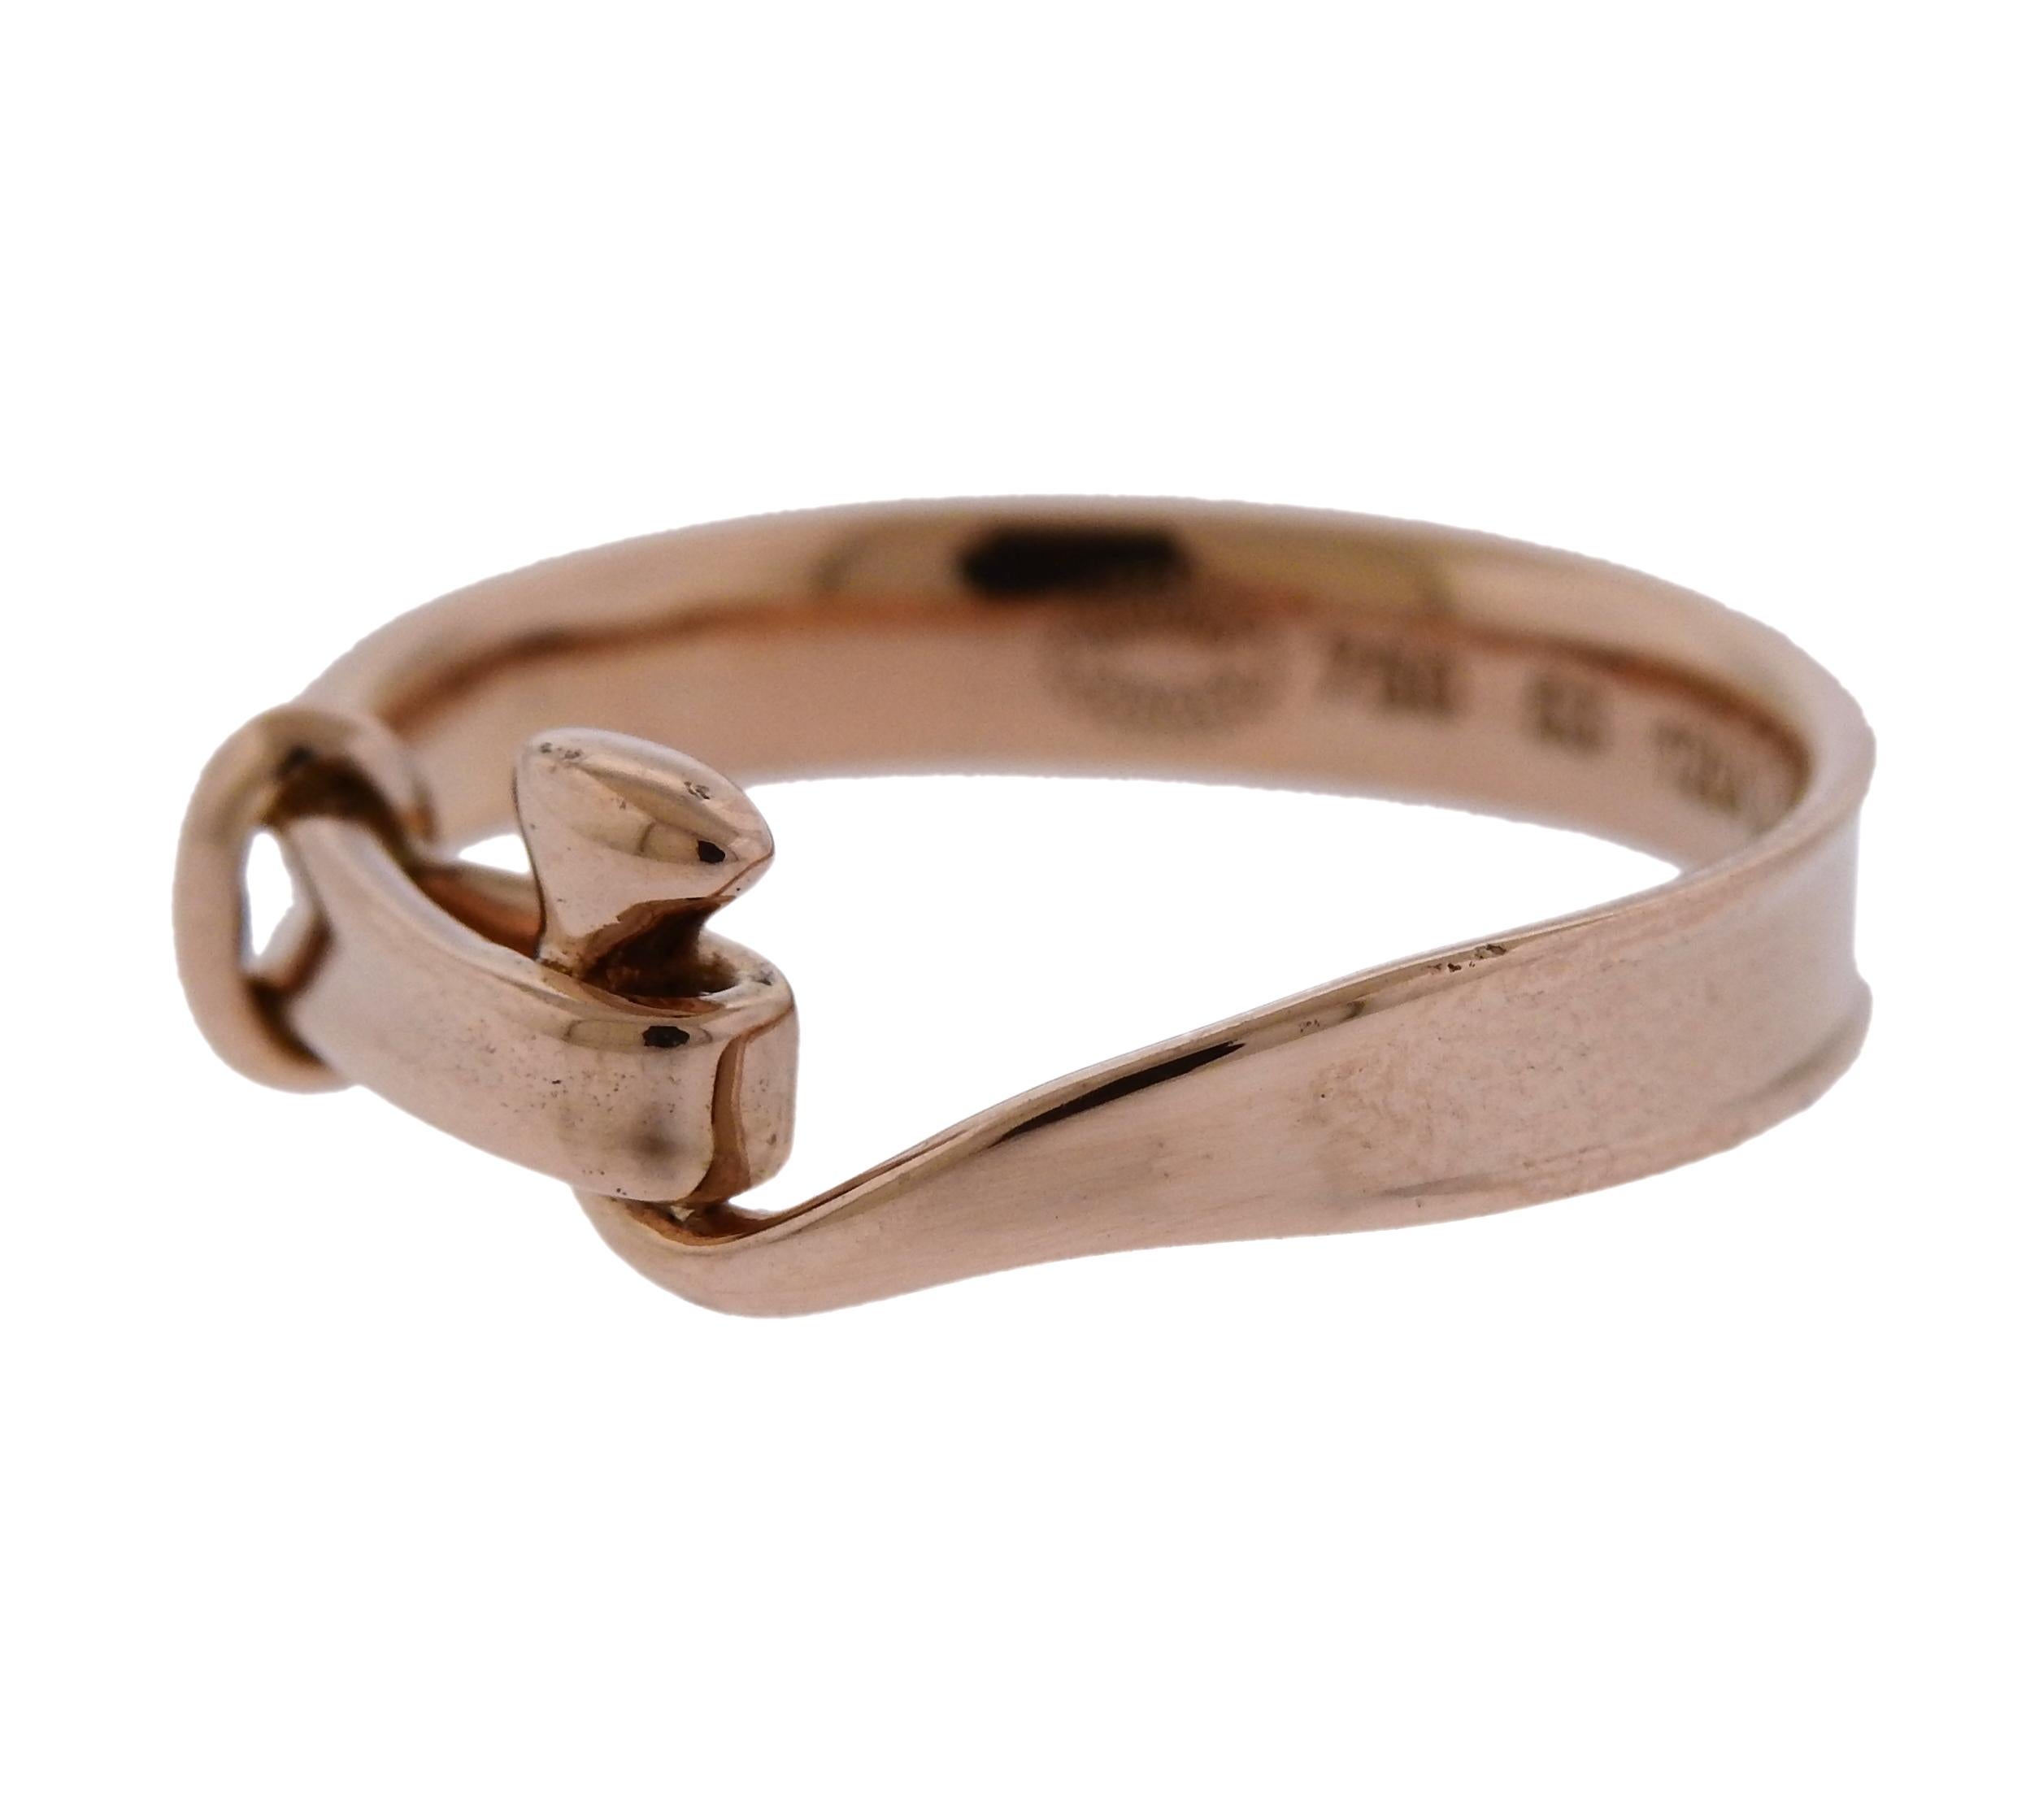 18k rose gold ring, crafted by Georg Jensen. Brand new with packaging. Ring size - 6.25, ring top is 6mm wide and weighs 3 grams. Marked 925 S, Georg Jensen 1204A 53.